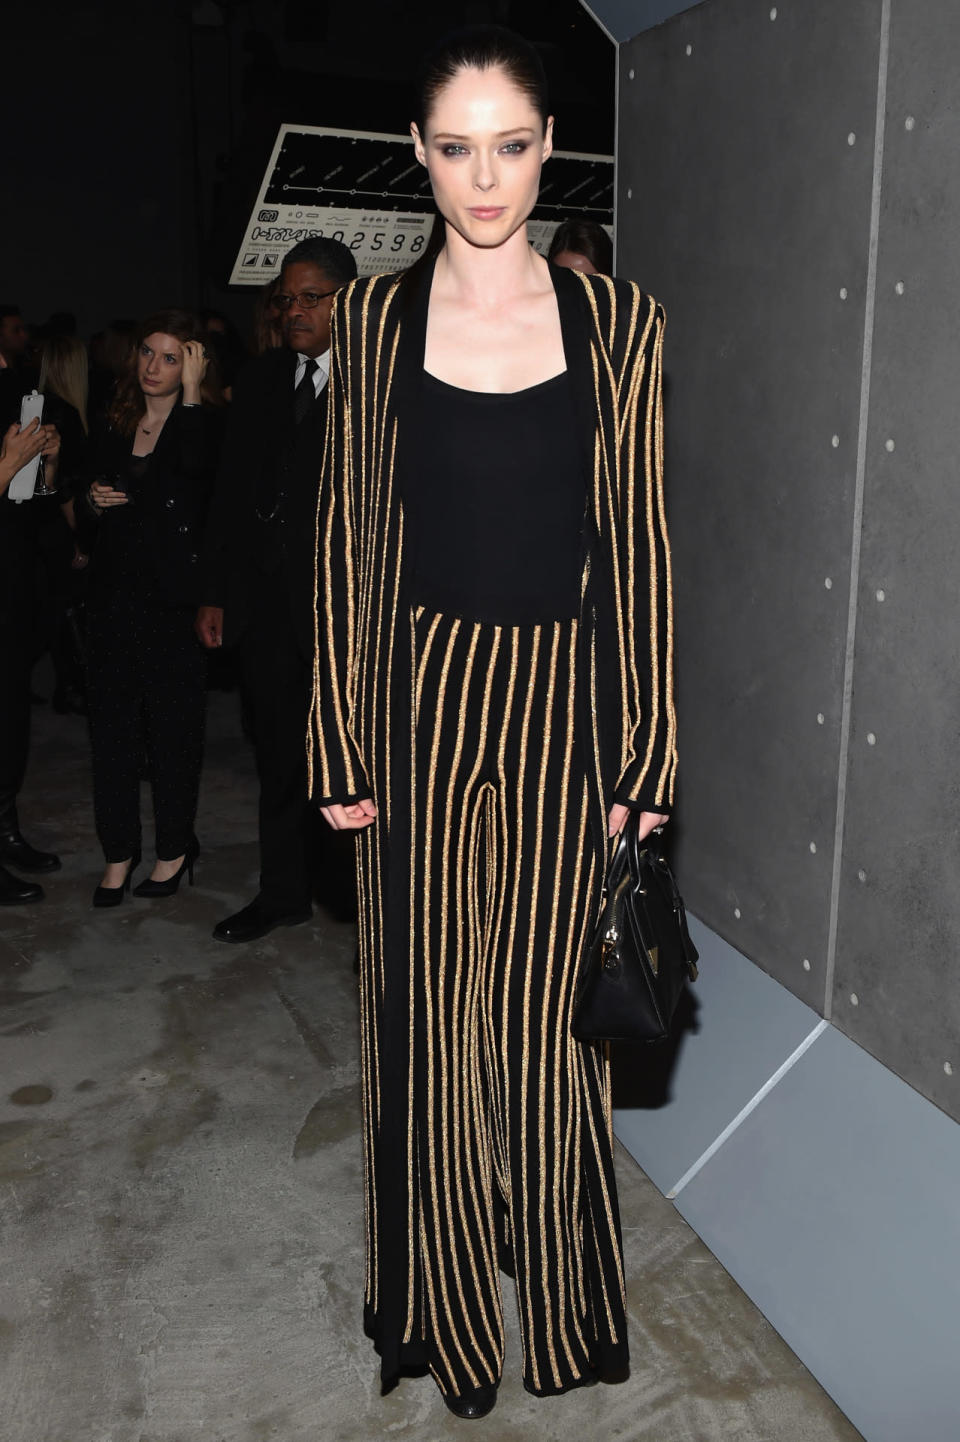 Coco Rocha in gold striped sweater and pants at the Balmain x H&M party. 